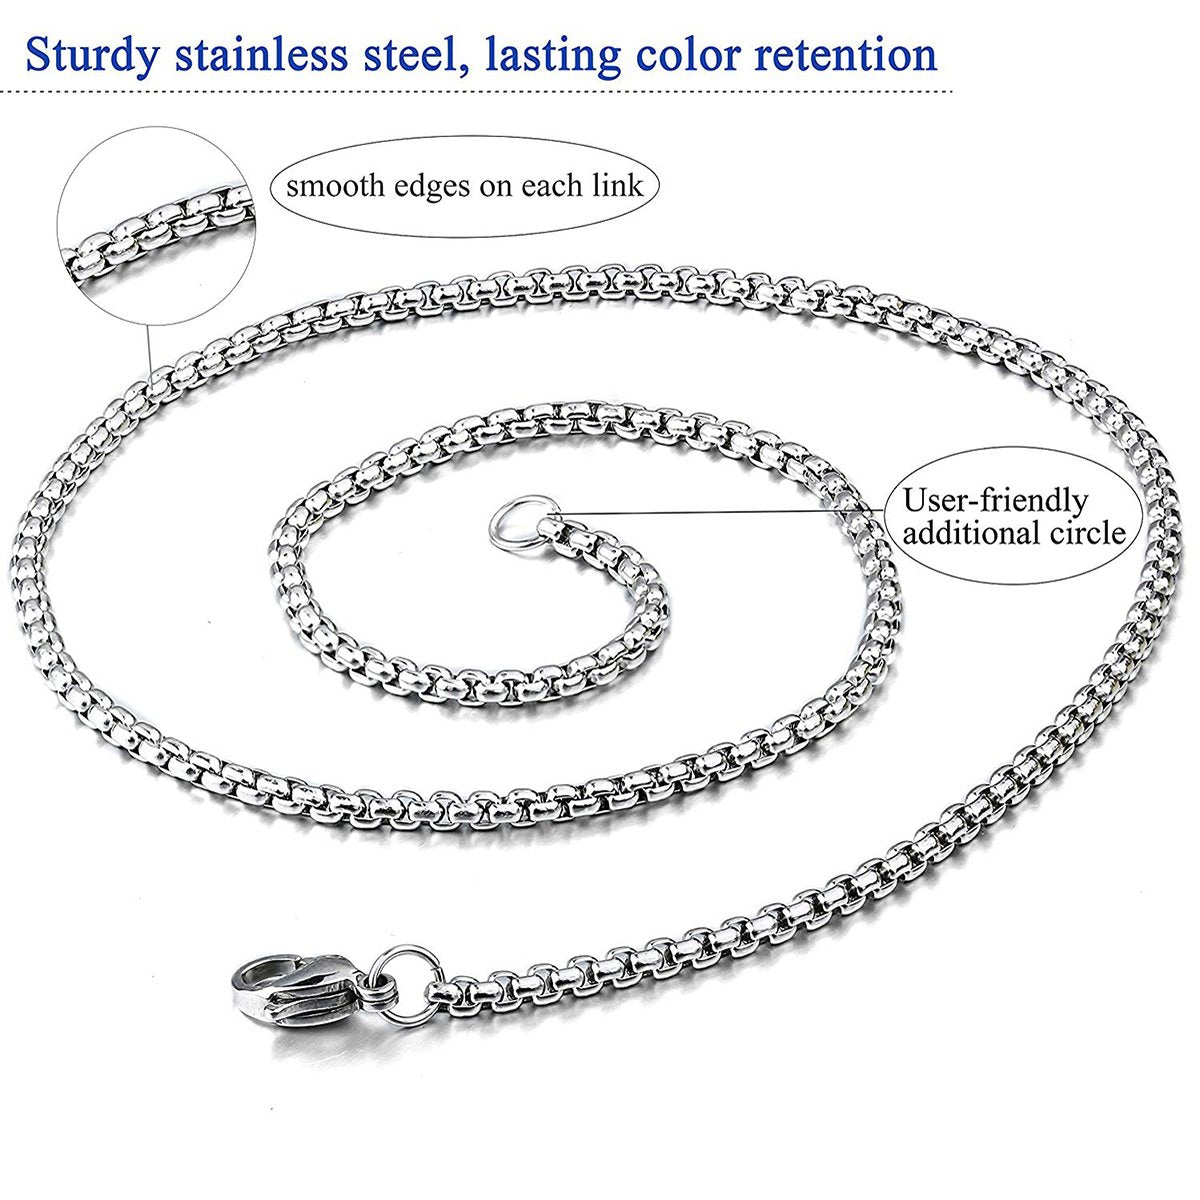 Jxlepe Miami Cuban Link Chain 16mm Big Silver White Stainless Steel Curb  Necklace for Men (20) | Amazon.com